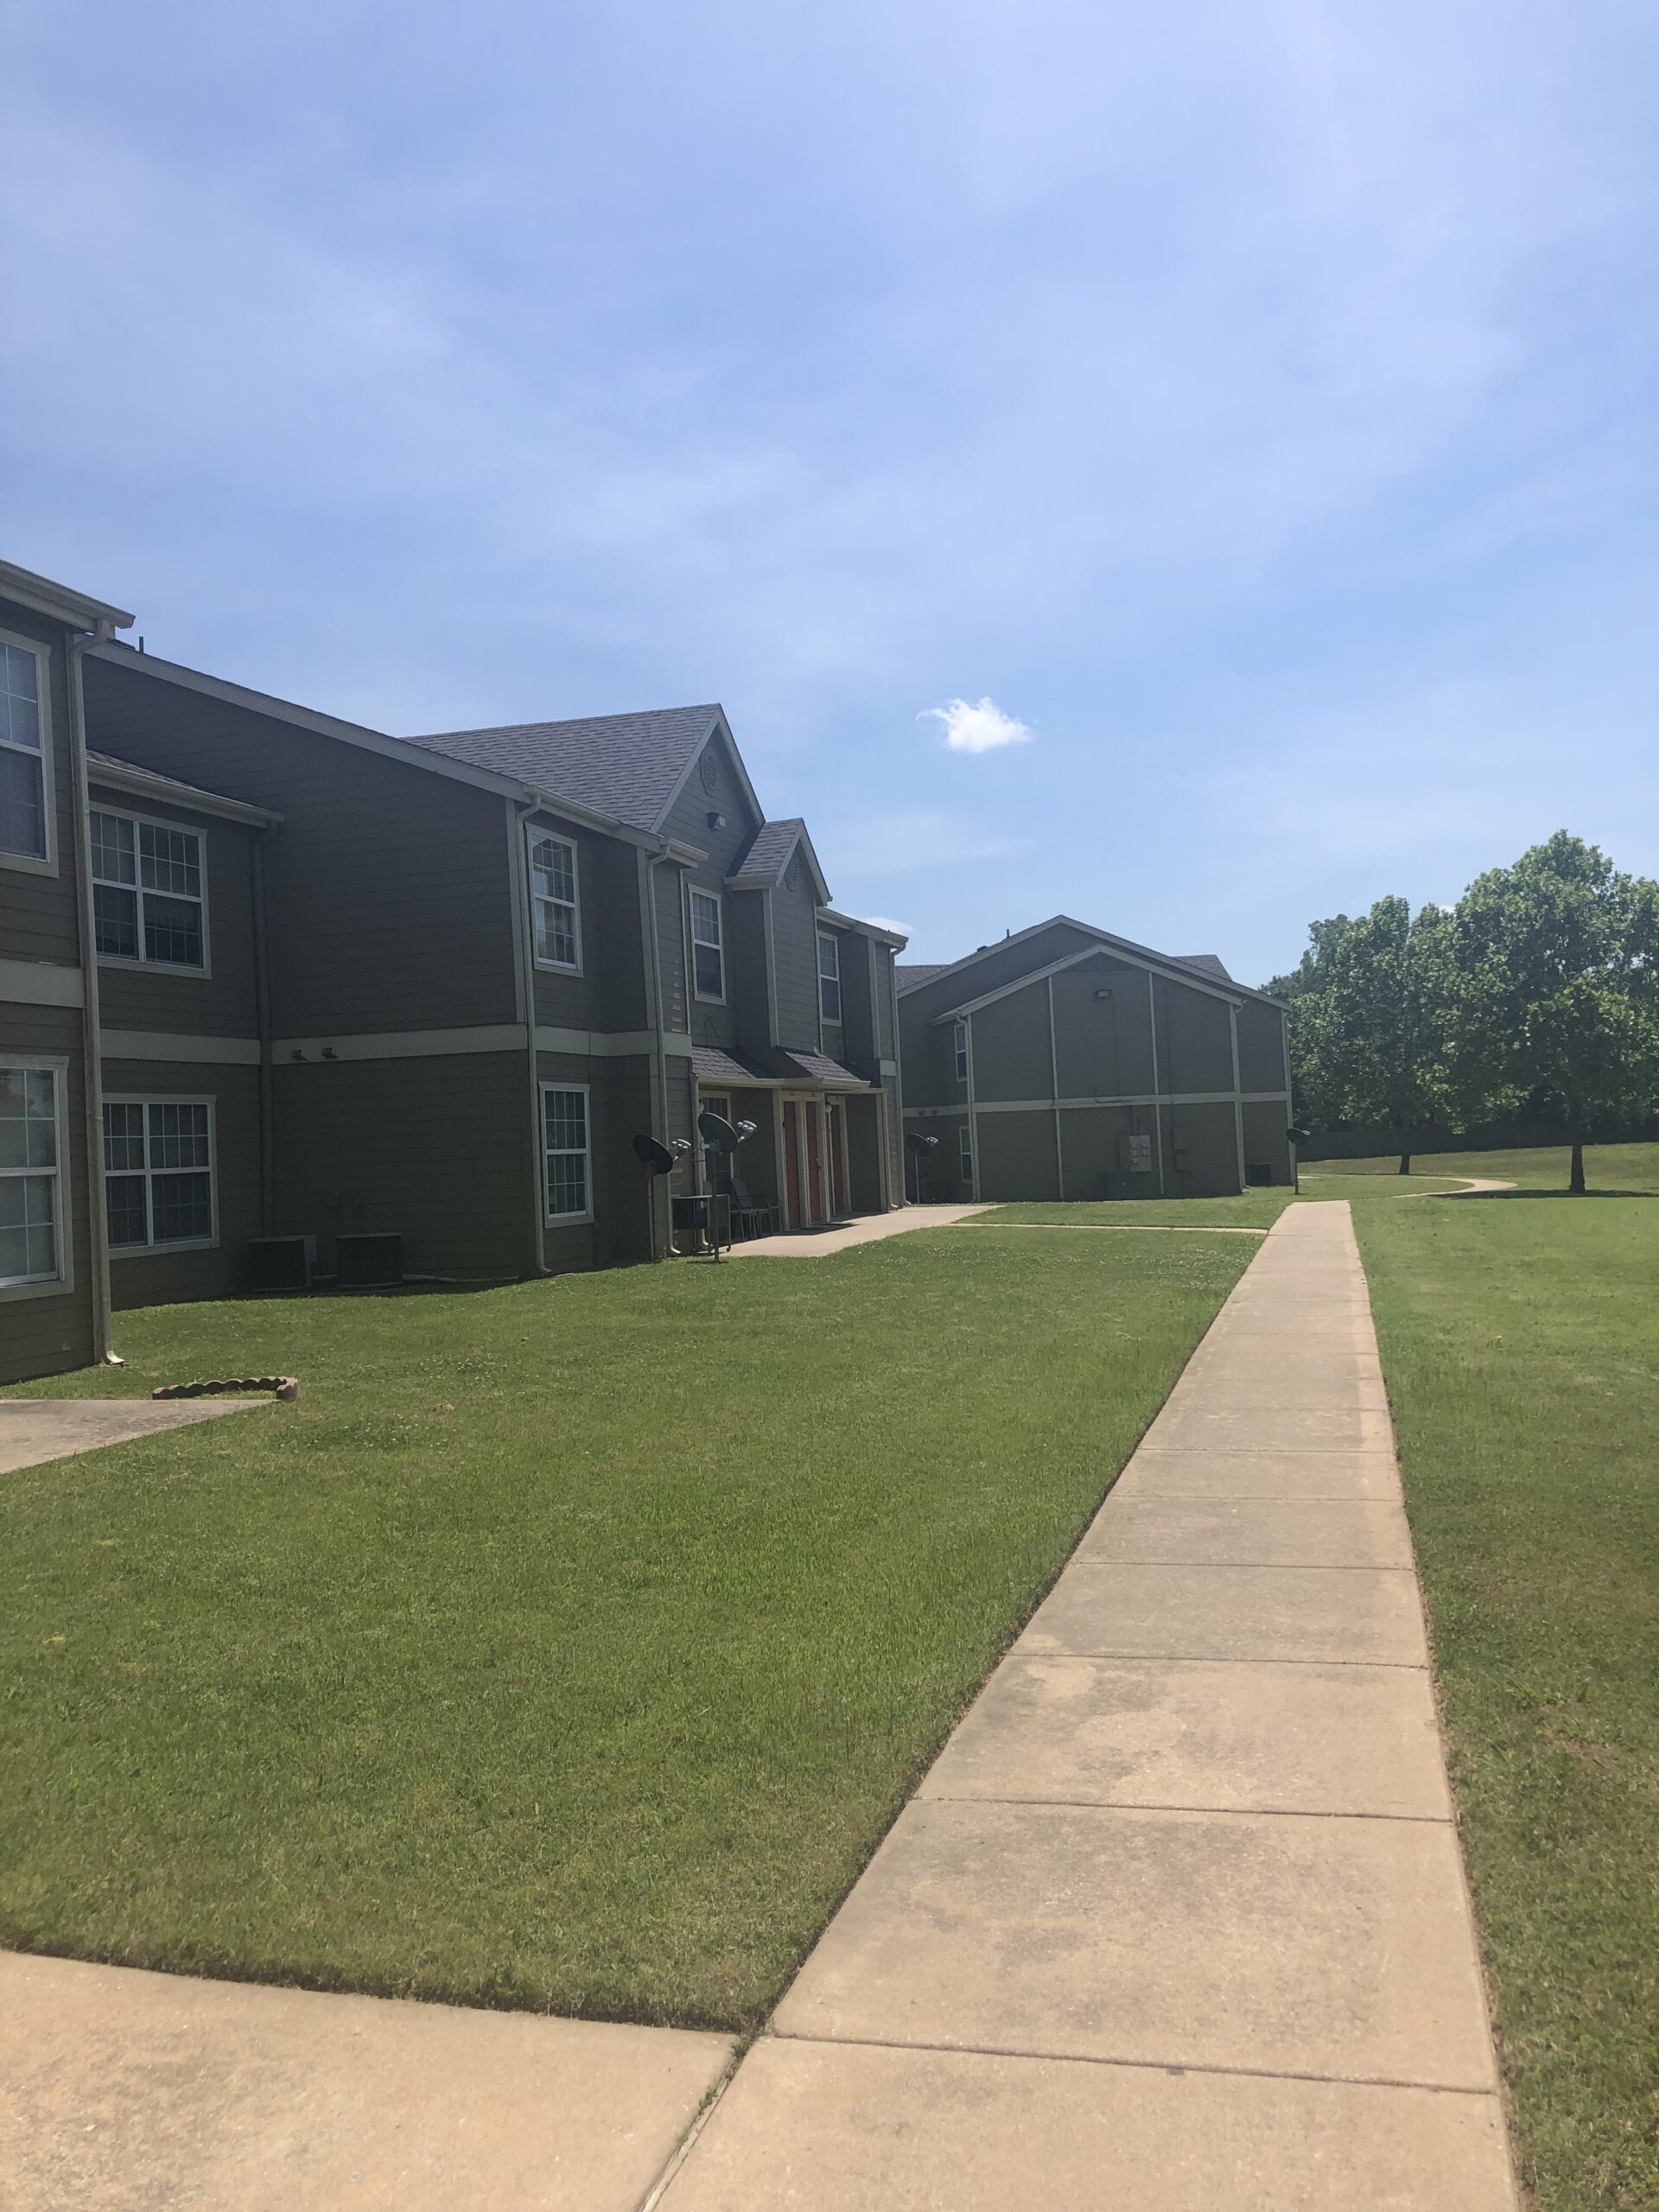 RIVER POINTE APARTMENTS